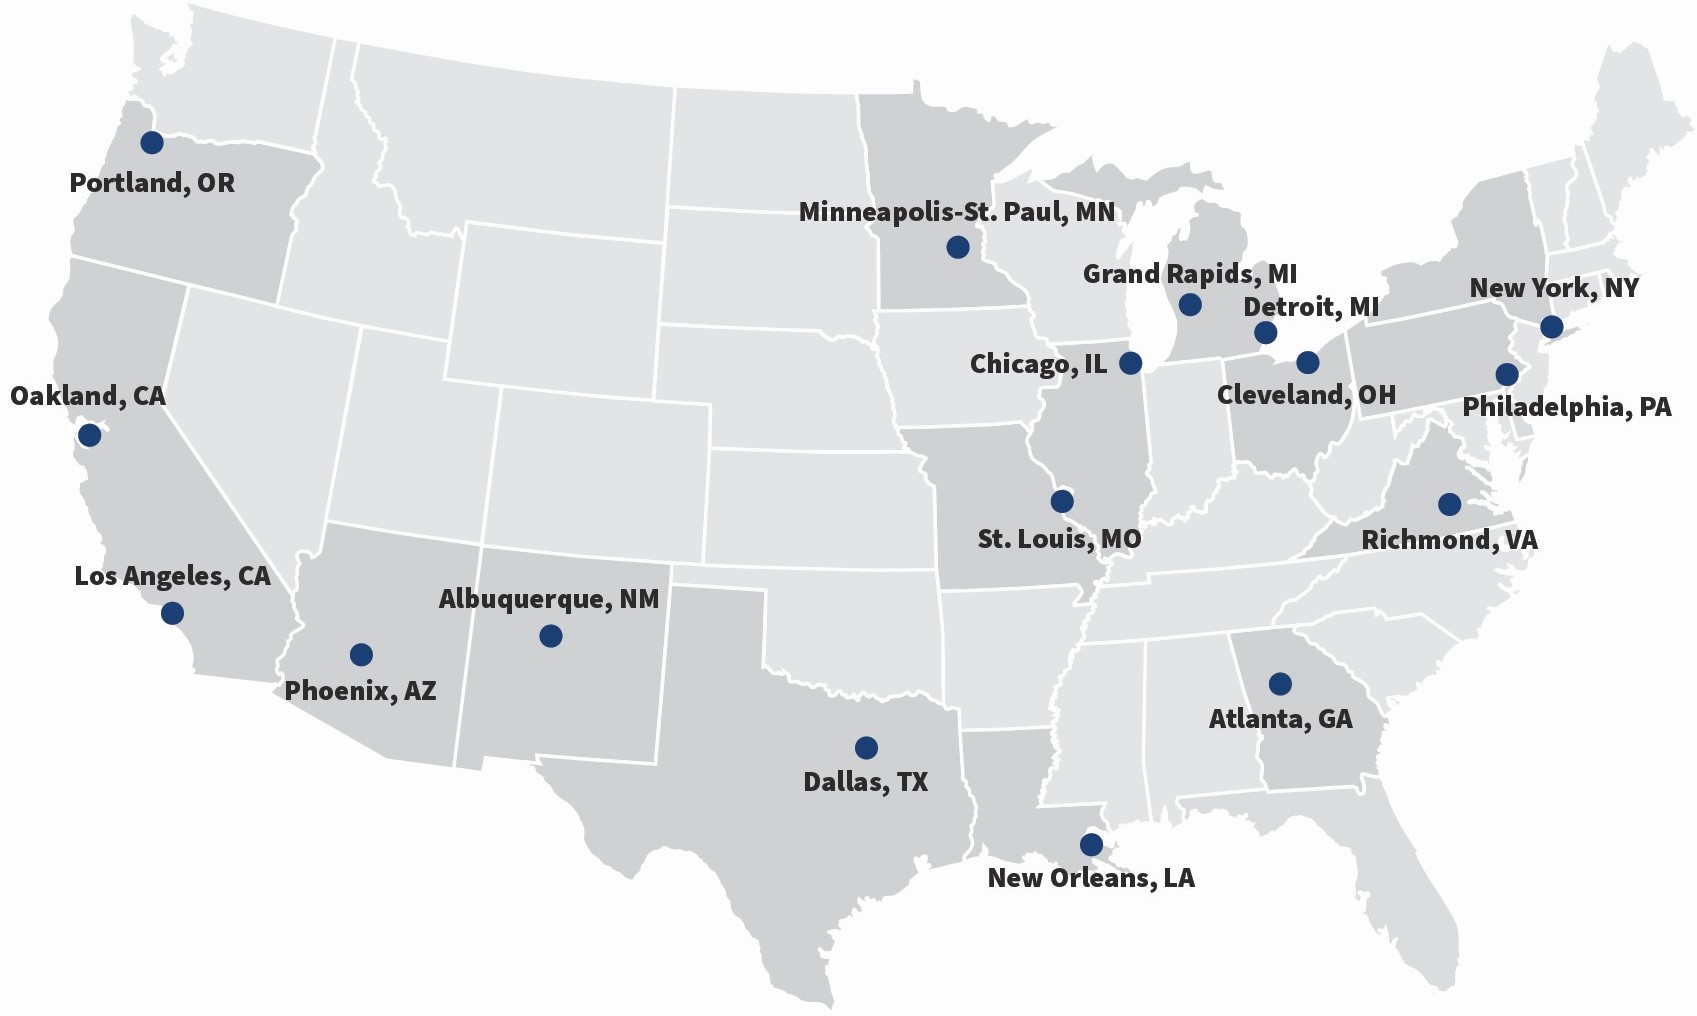 Map of the U.S. showing Urban Service Center locations.